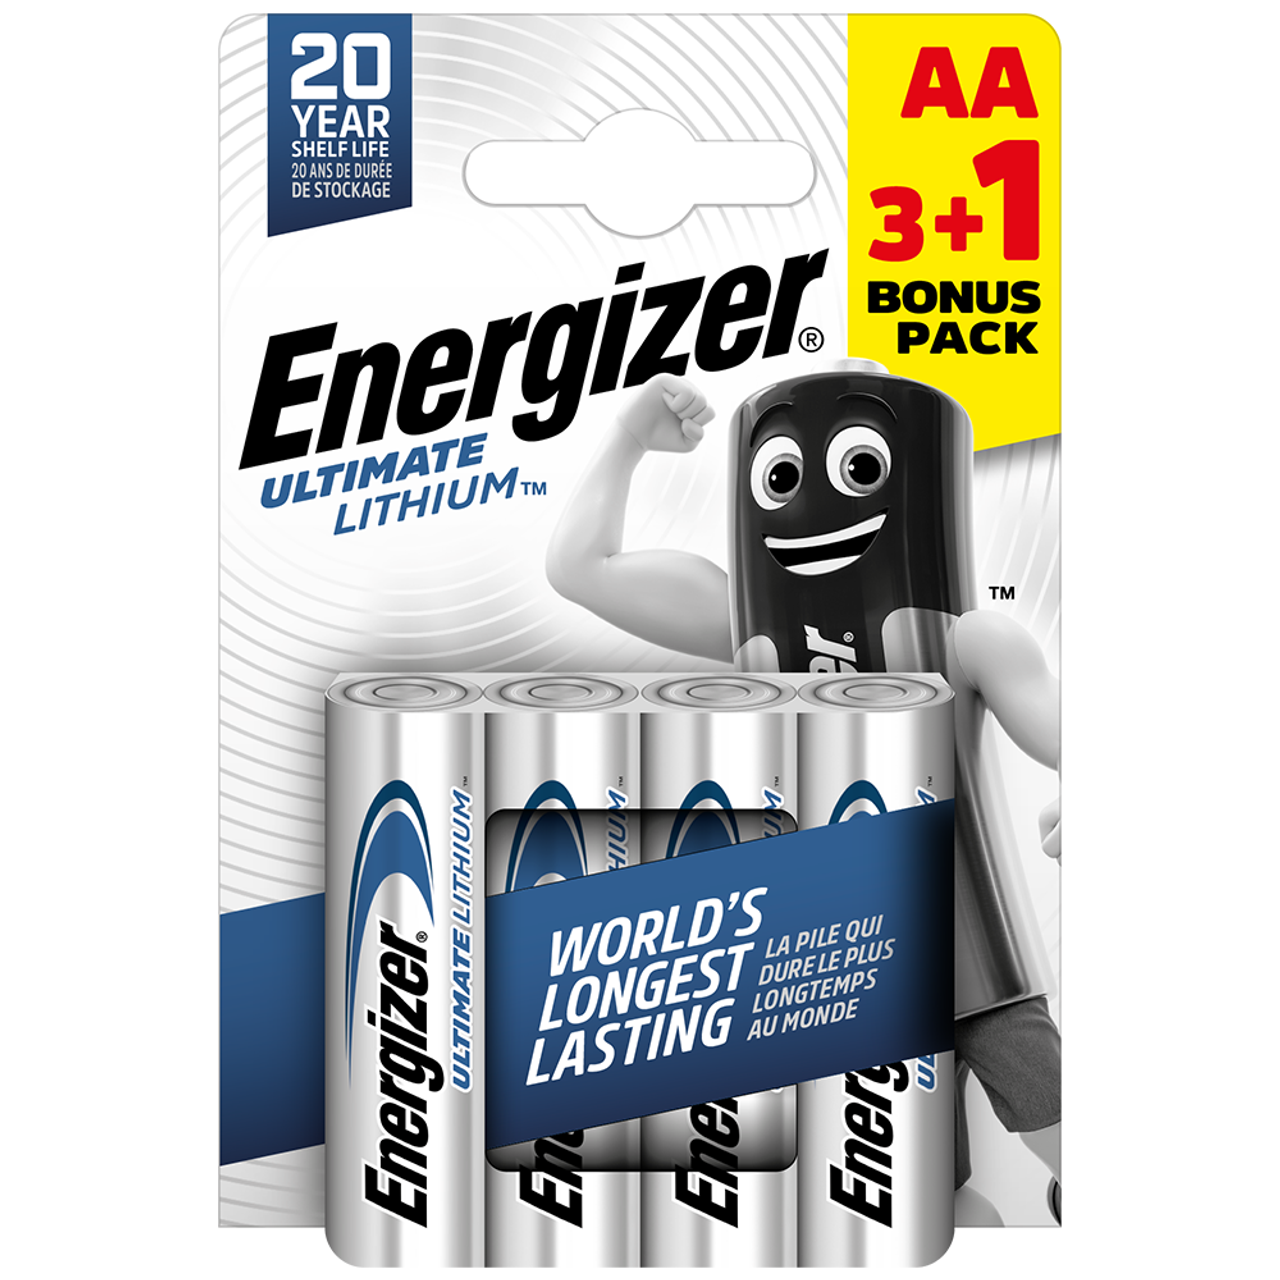 Energizer Lithium AA Batteries - 24 Pack 